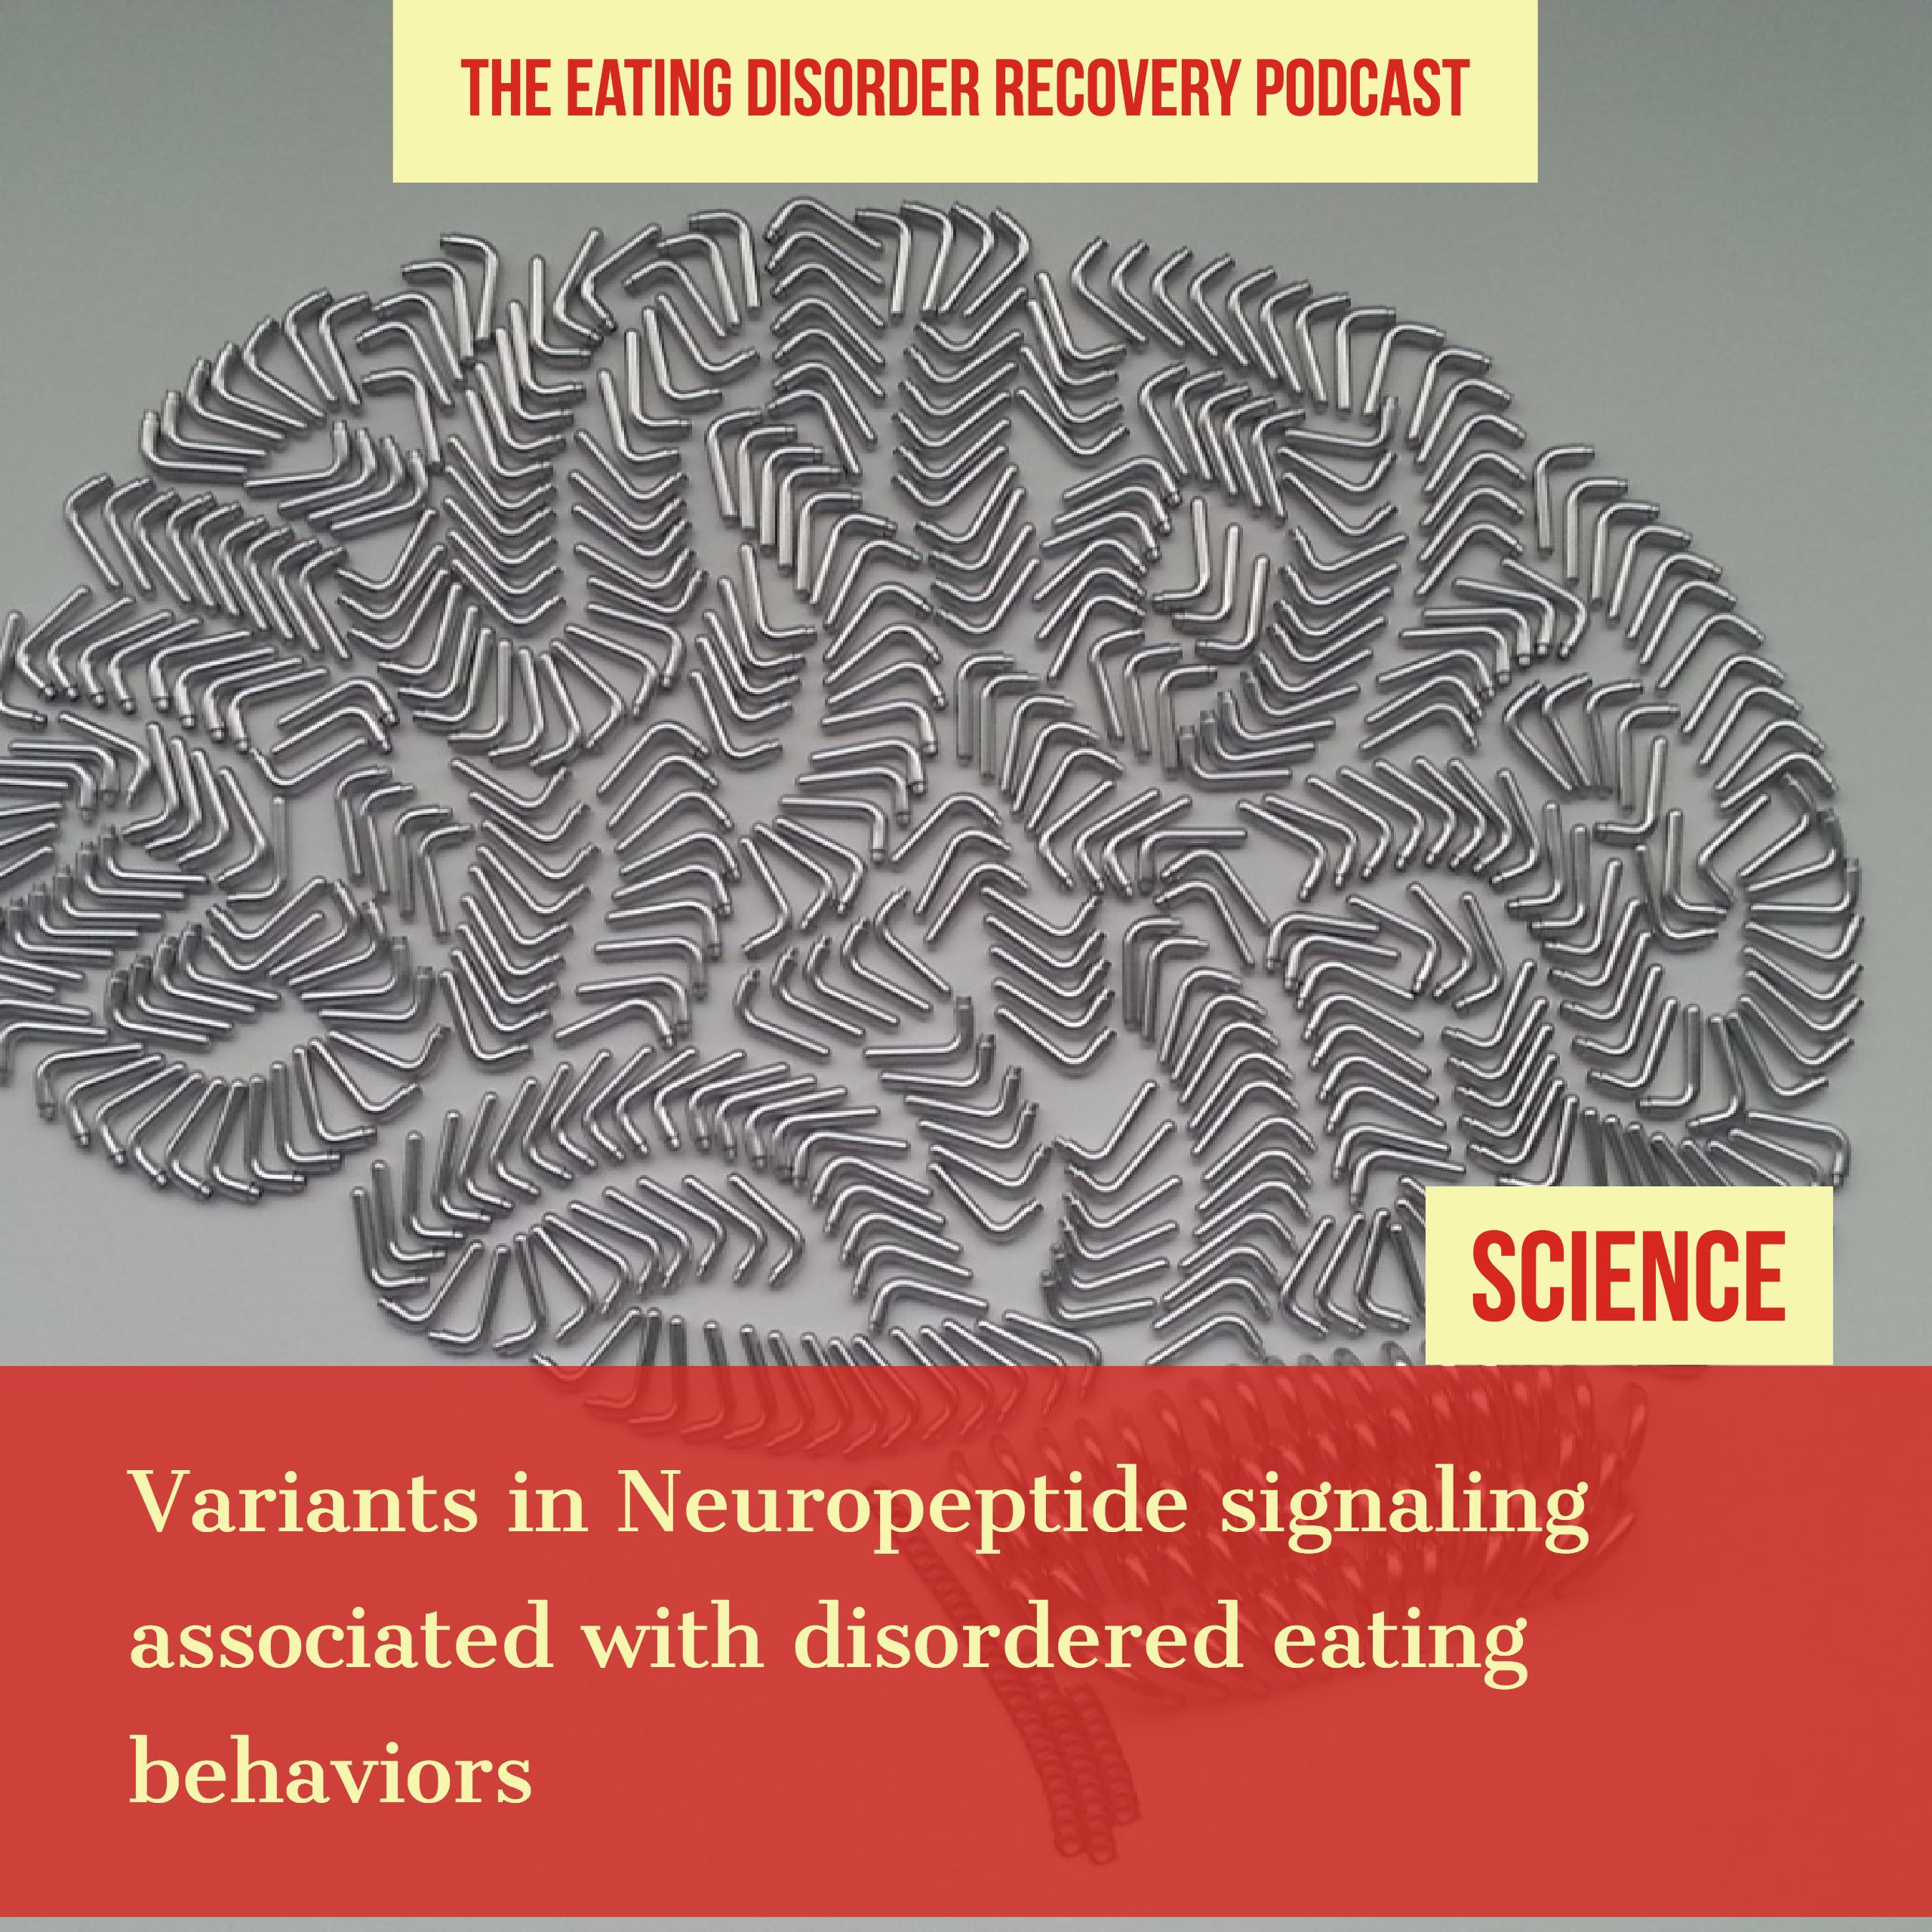 Science: Variants in neuropeptide signaling are associated with disordered eating behaviors